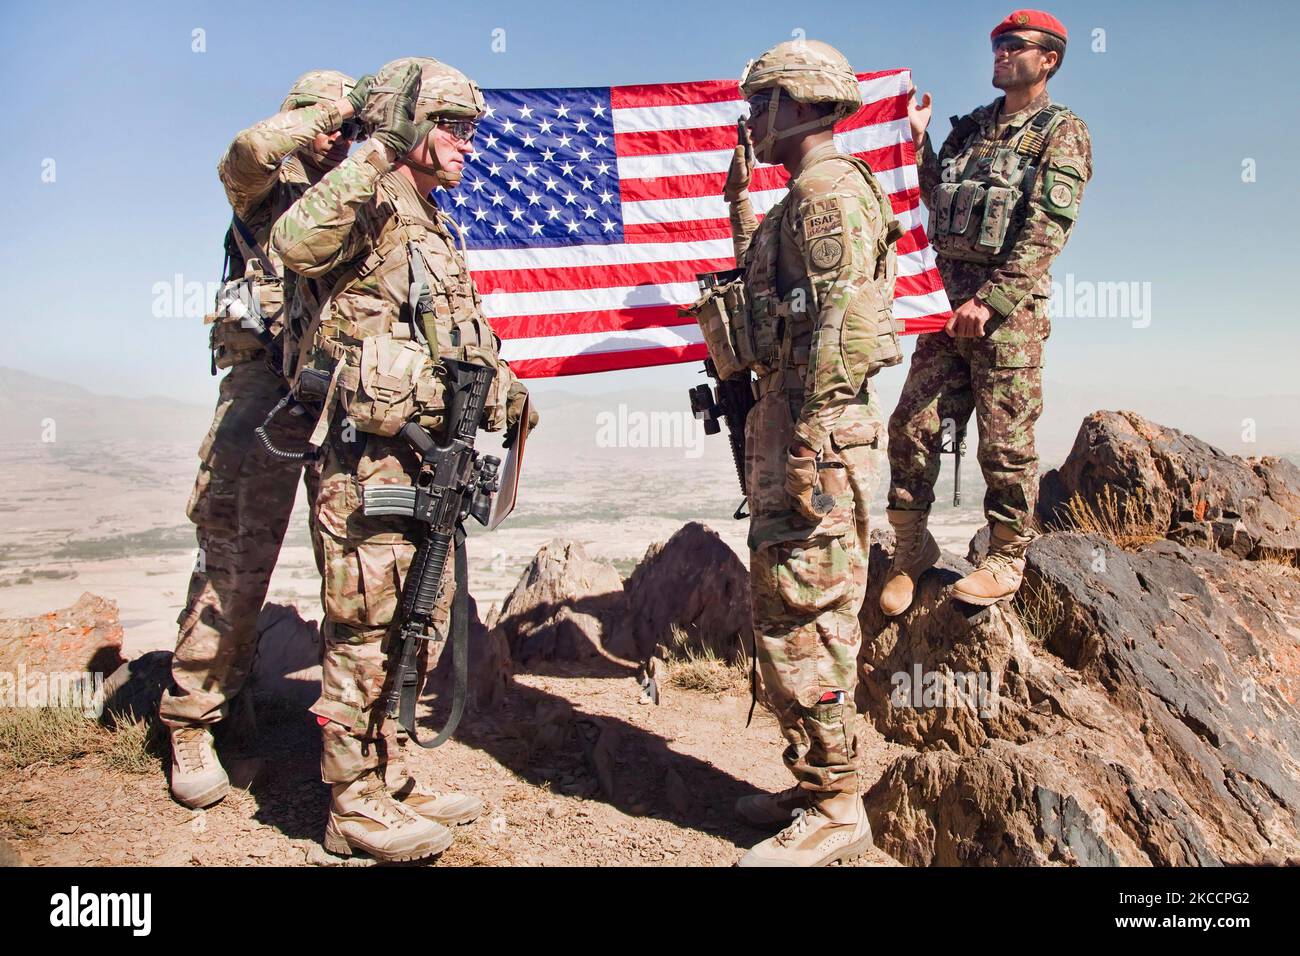 A U.S. Army Soldier is reenlisted atop Pride Rock mountain in Afghanistan. Stock Photo